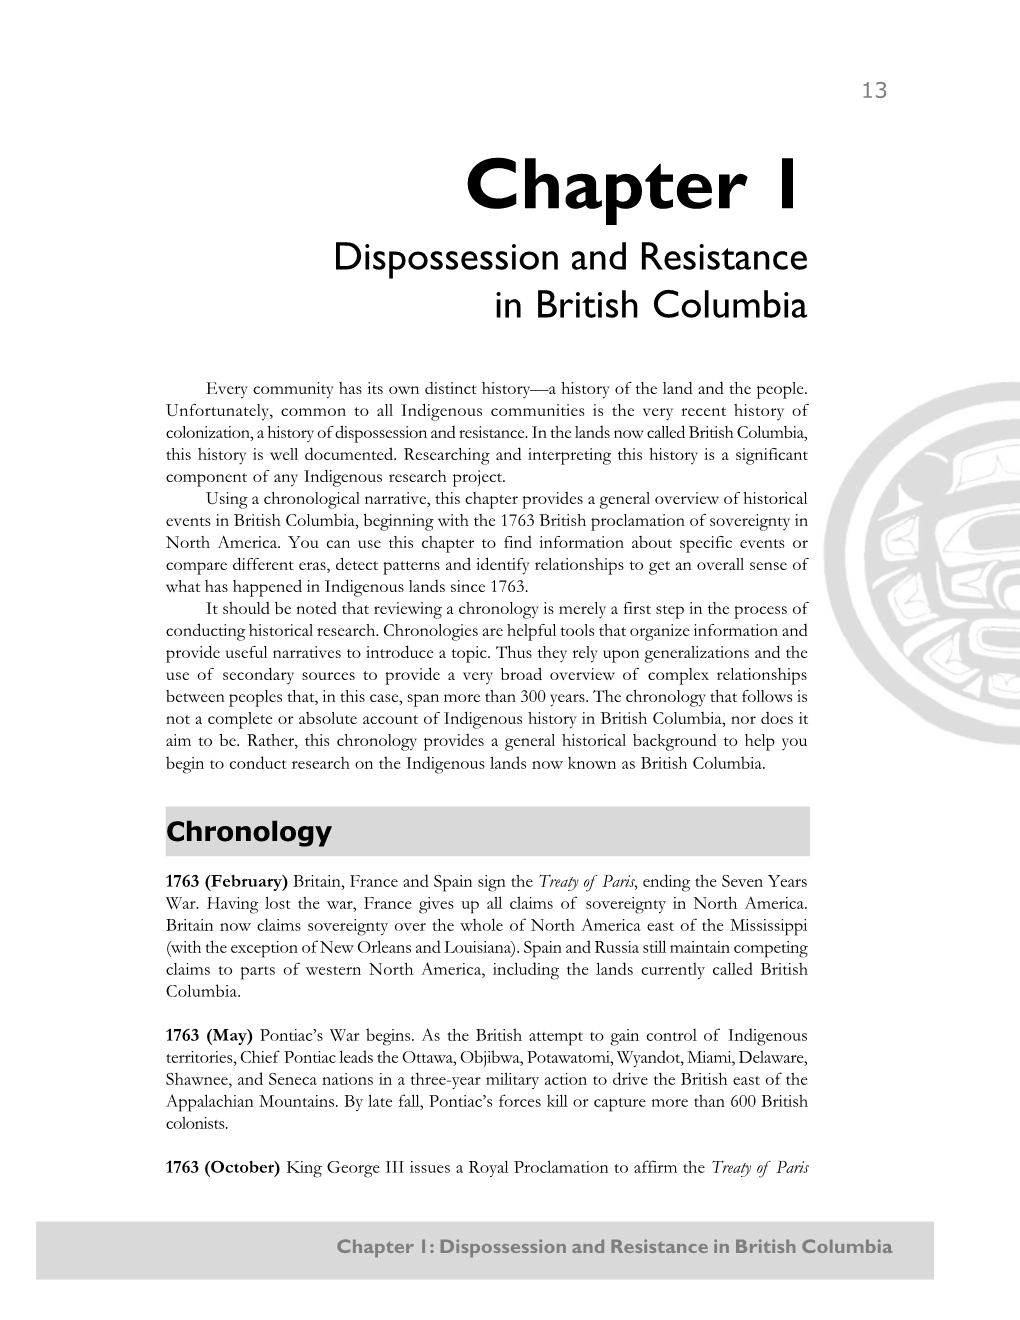 Dispossession and Resistance in British Columbia